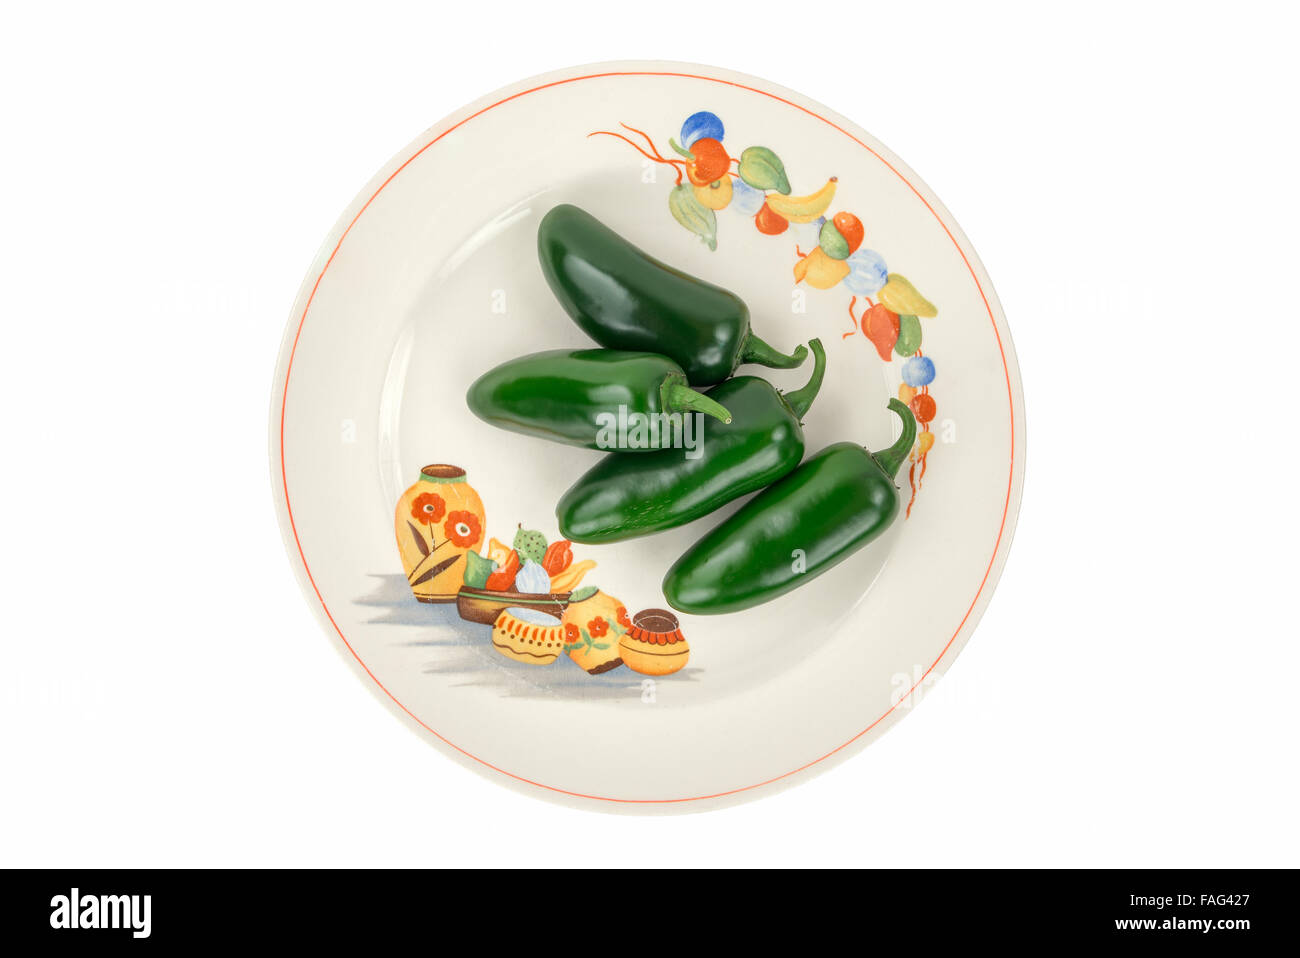 Four Green Jalapeno Peppers on a Colorful, Festive, Antique Fiesta Plate isolated on white. Stock Photo